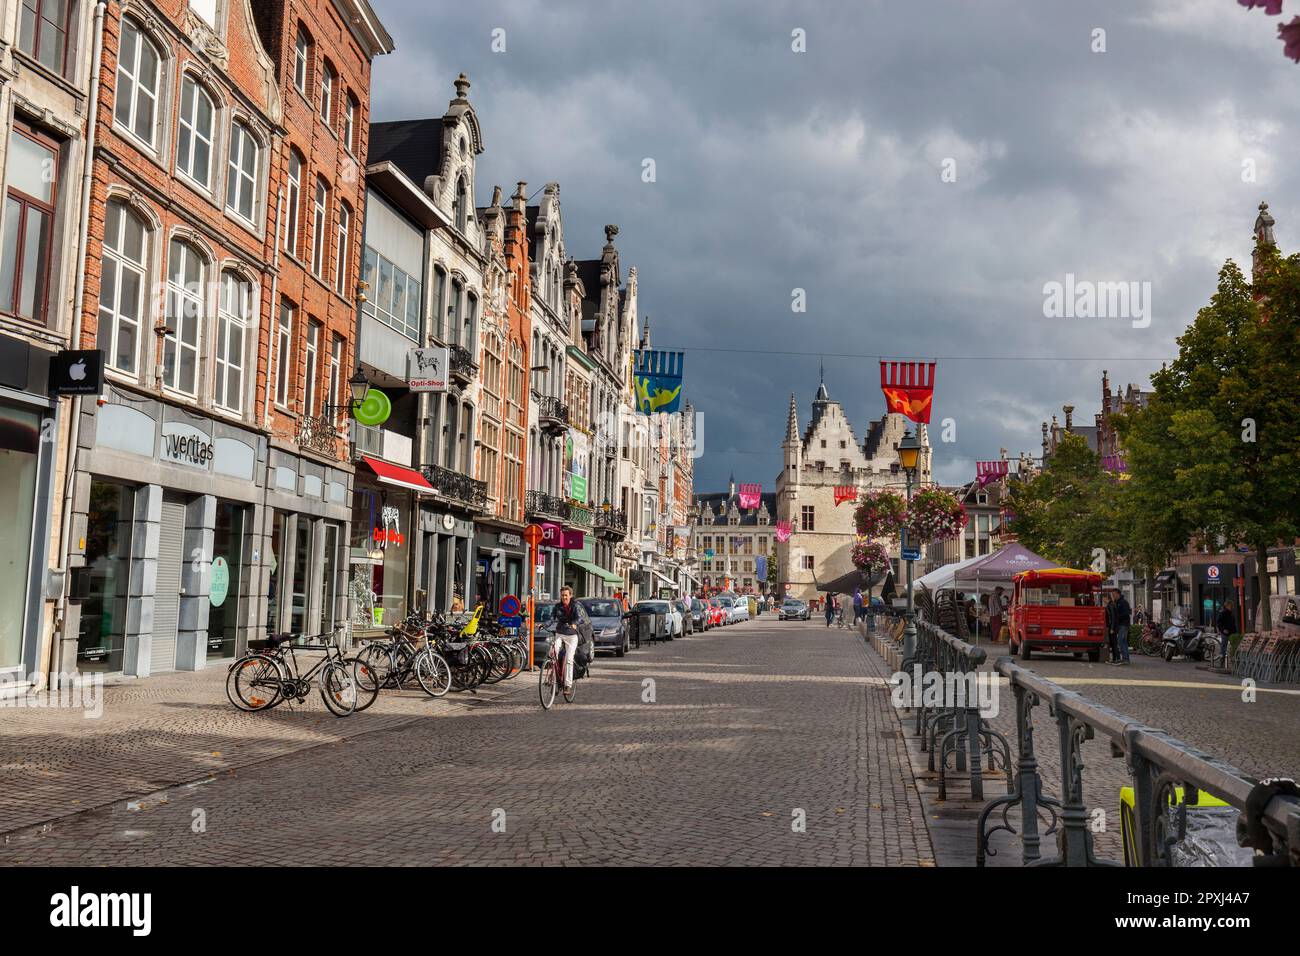 Woman on bicycle in Ijzerenleen with historic gabled shops, cafes and market with Schepenhuis - original town hall in background, Mechelen, Belgium Stock Photo